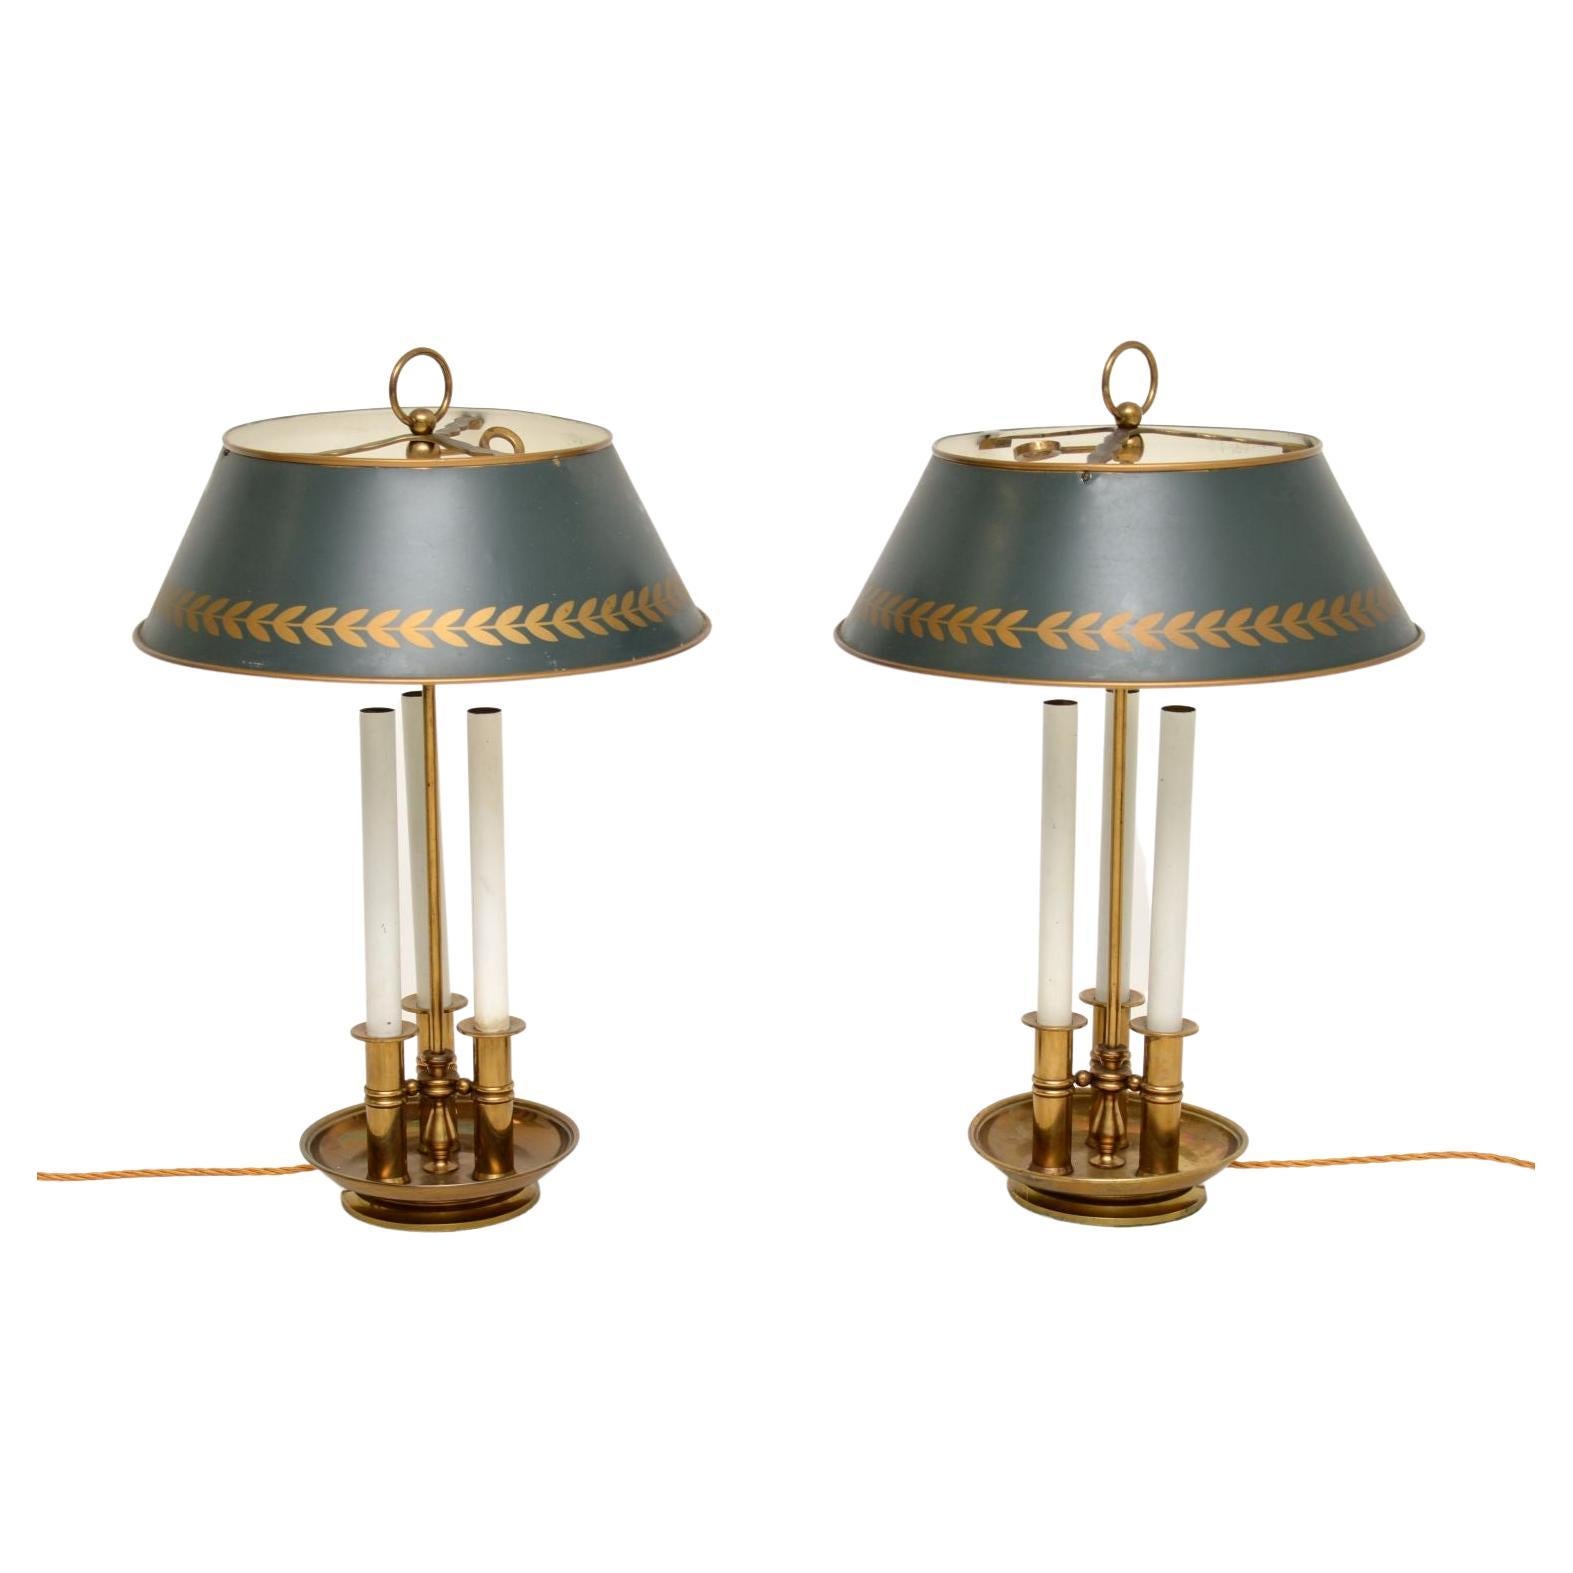 Pair of Antique Tole & Brass Table Lamps